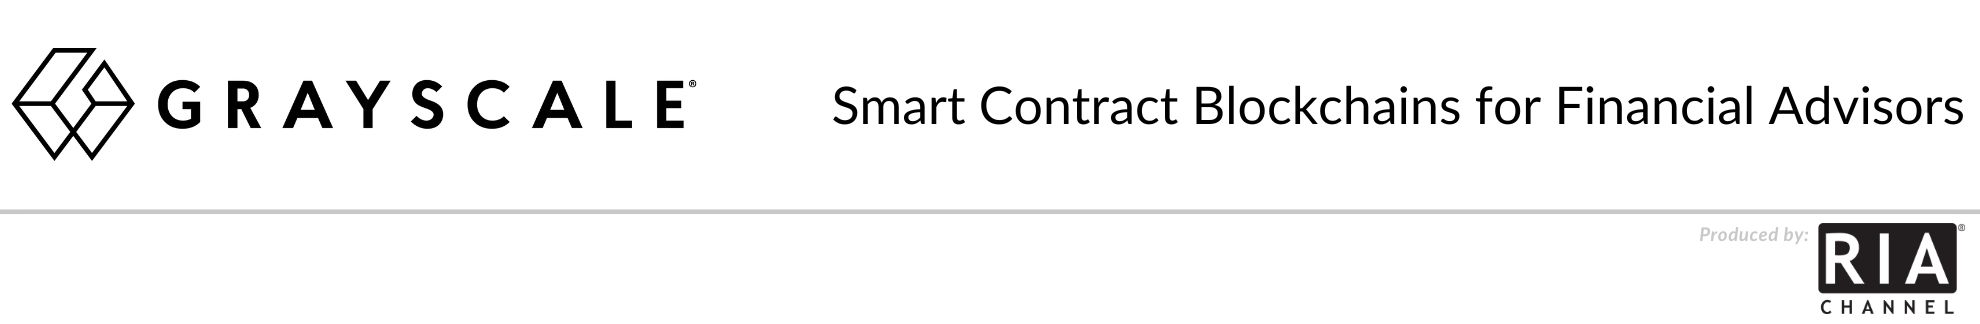 Smart Contract Blockchains for Financial Advisors